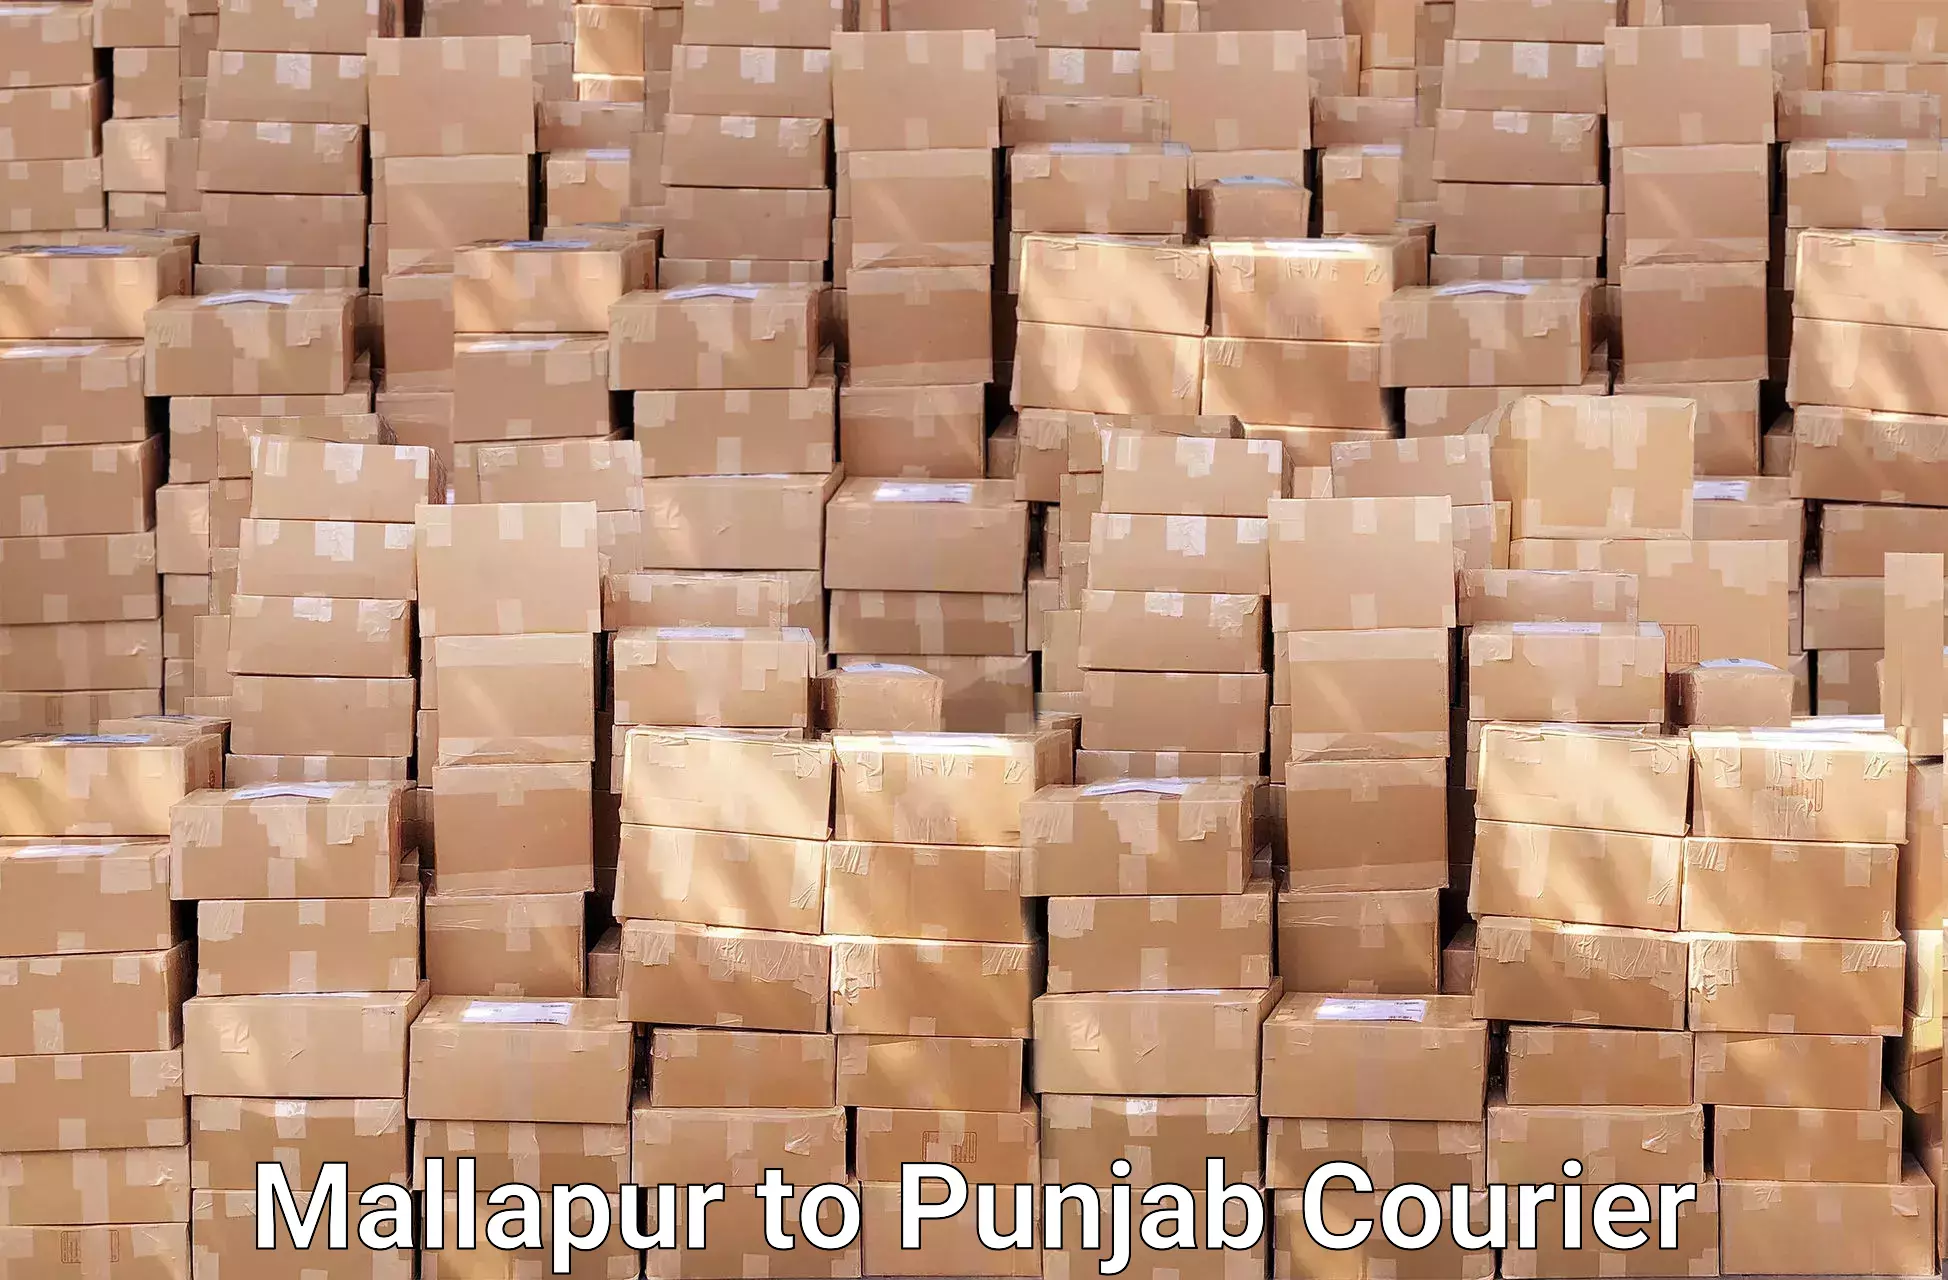 Quality relocation services in Mallapur to Sirhind Fatehgarh